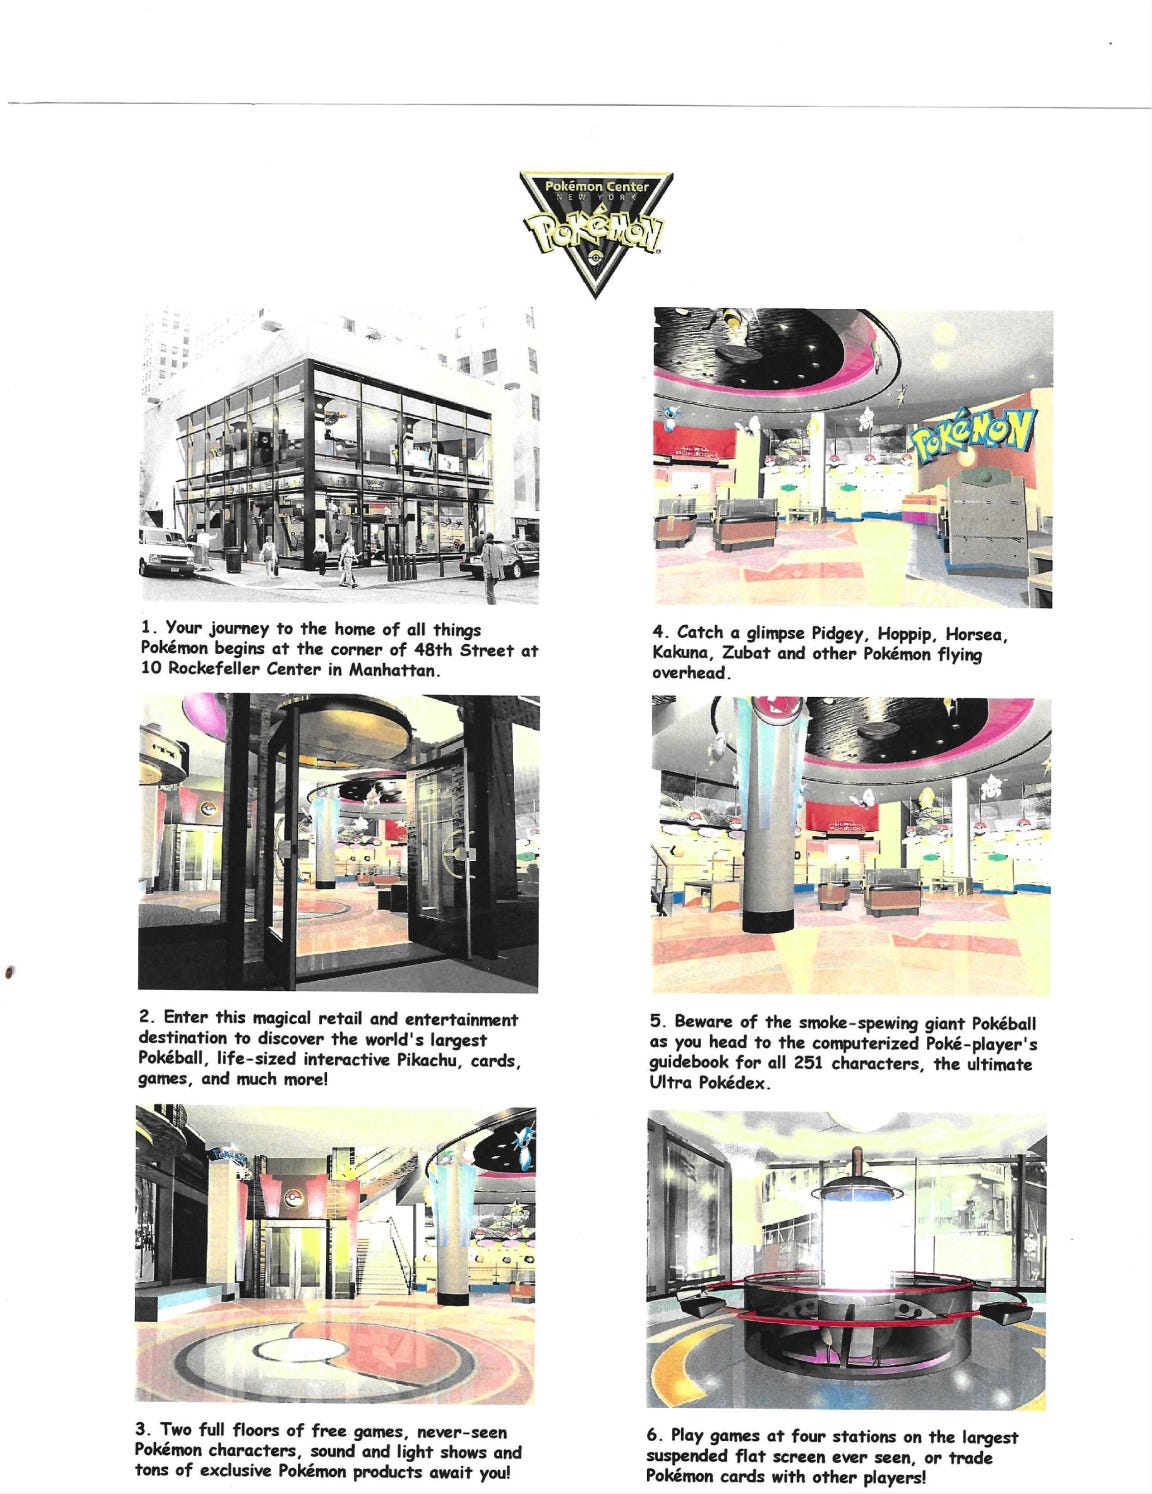 A scan of a features document for the grand opening of the Pokémon Center NYC